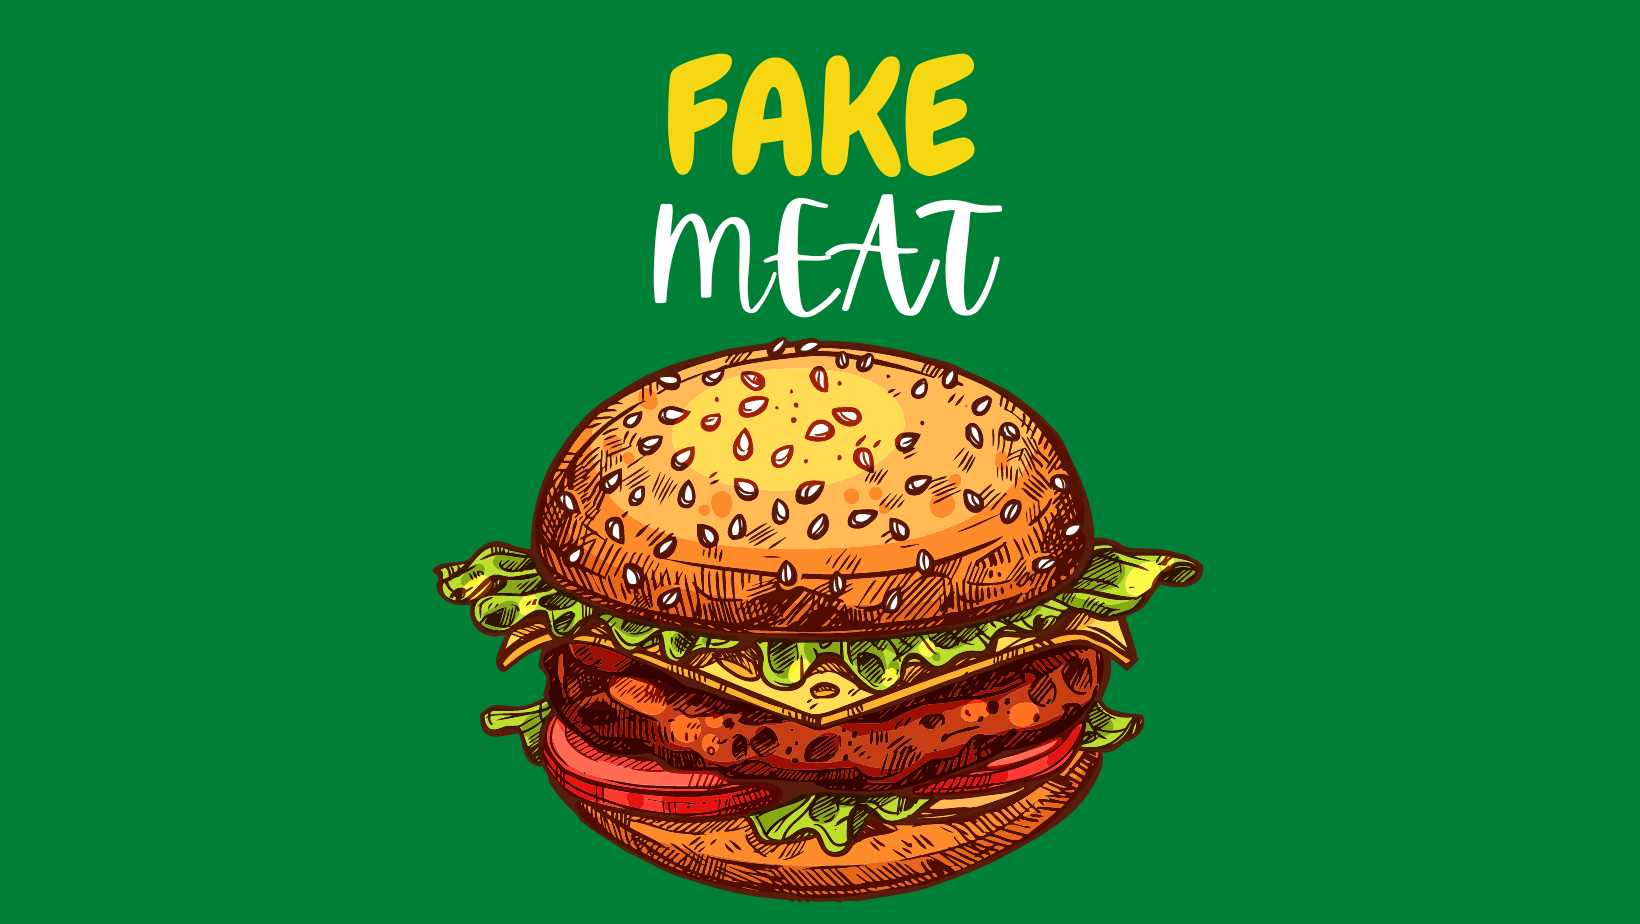 Image of a burger with fake meat written above it